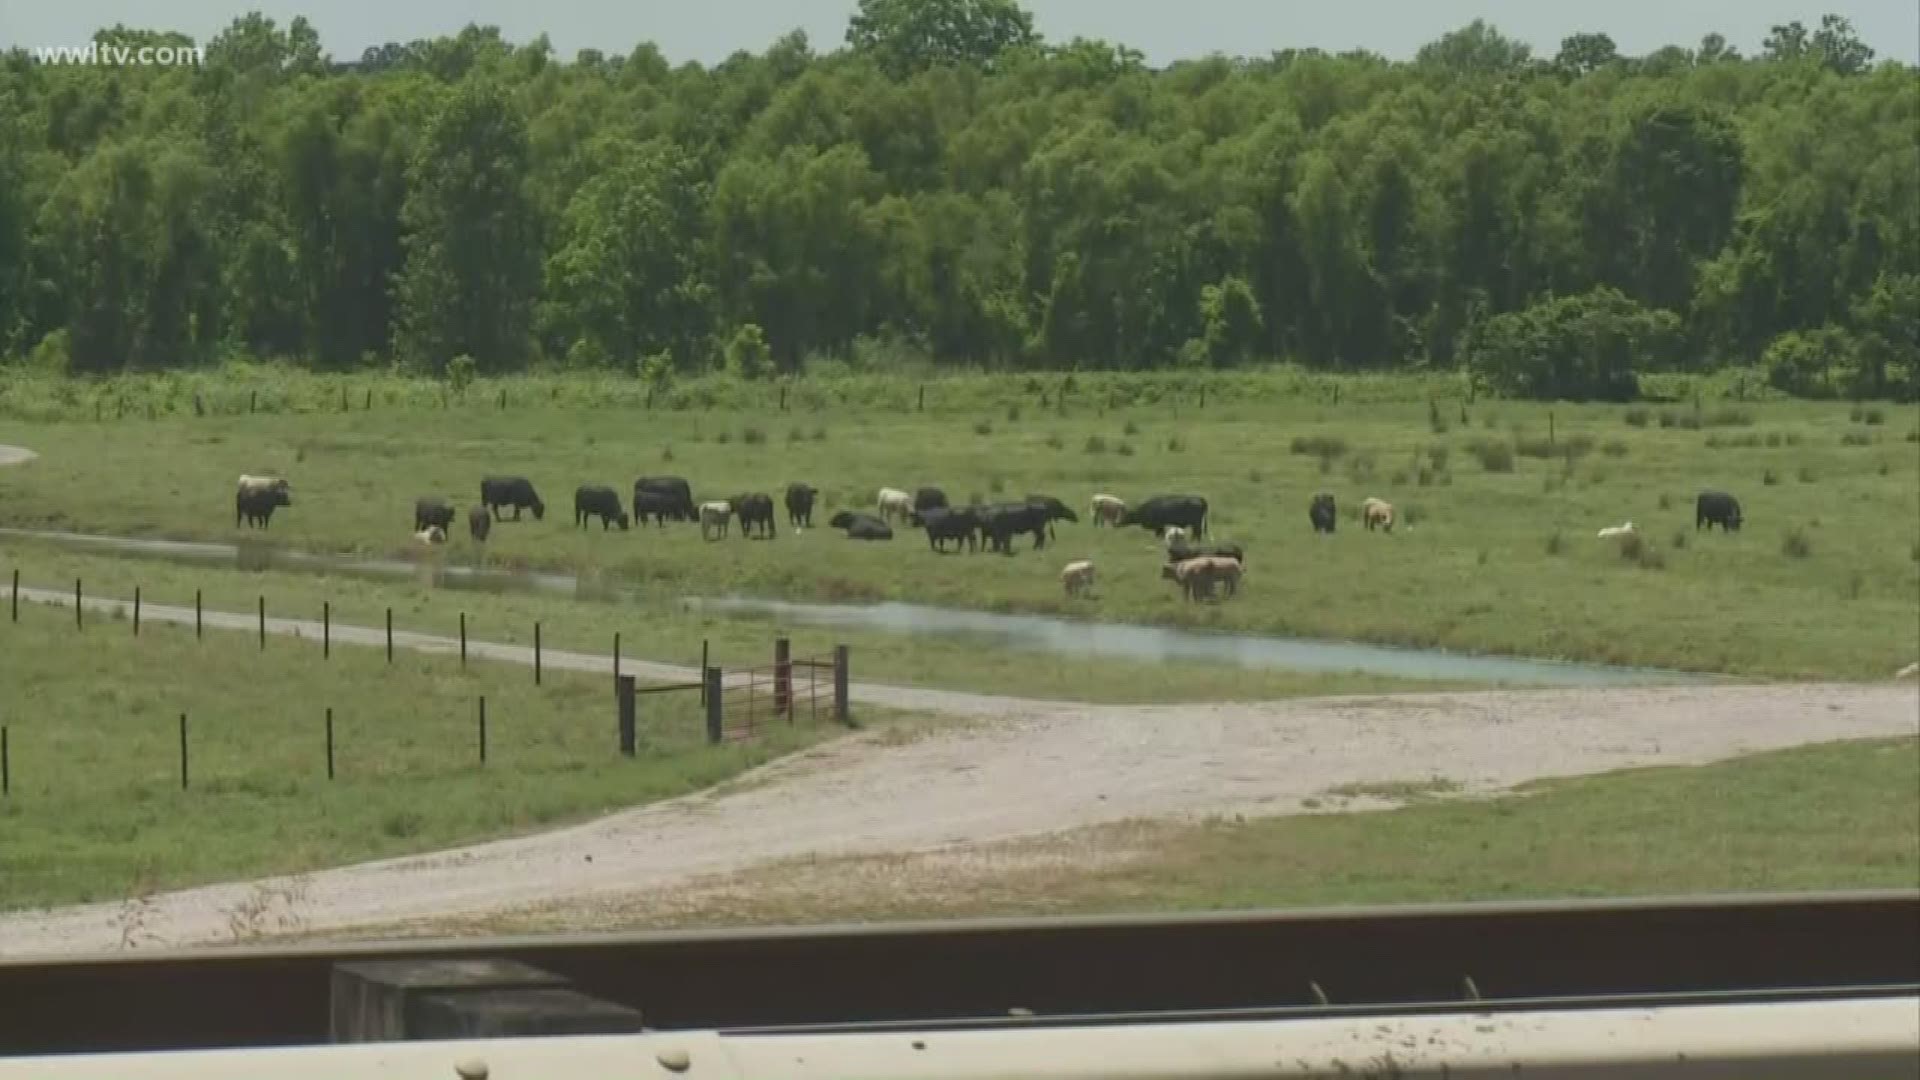 While water splashes against the Morganza Spillway structure, on the other side, cattle are roaming the fields.